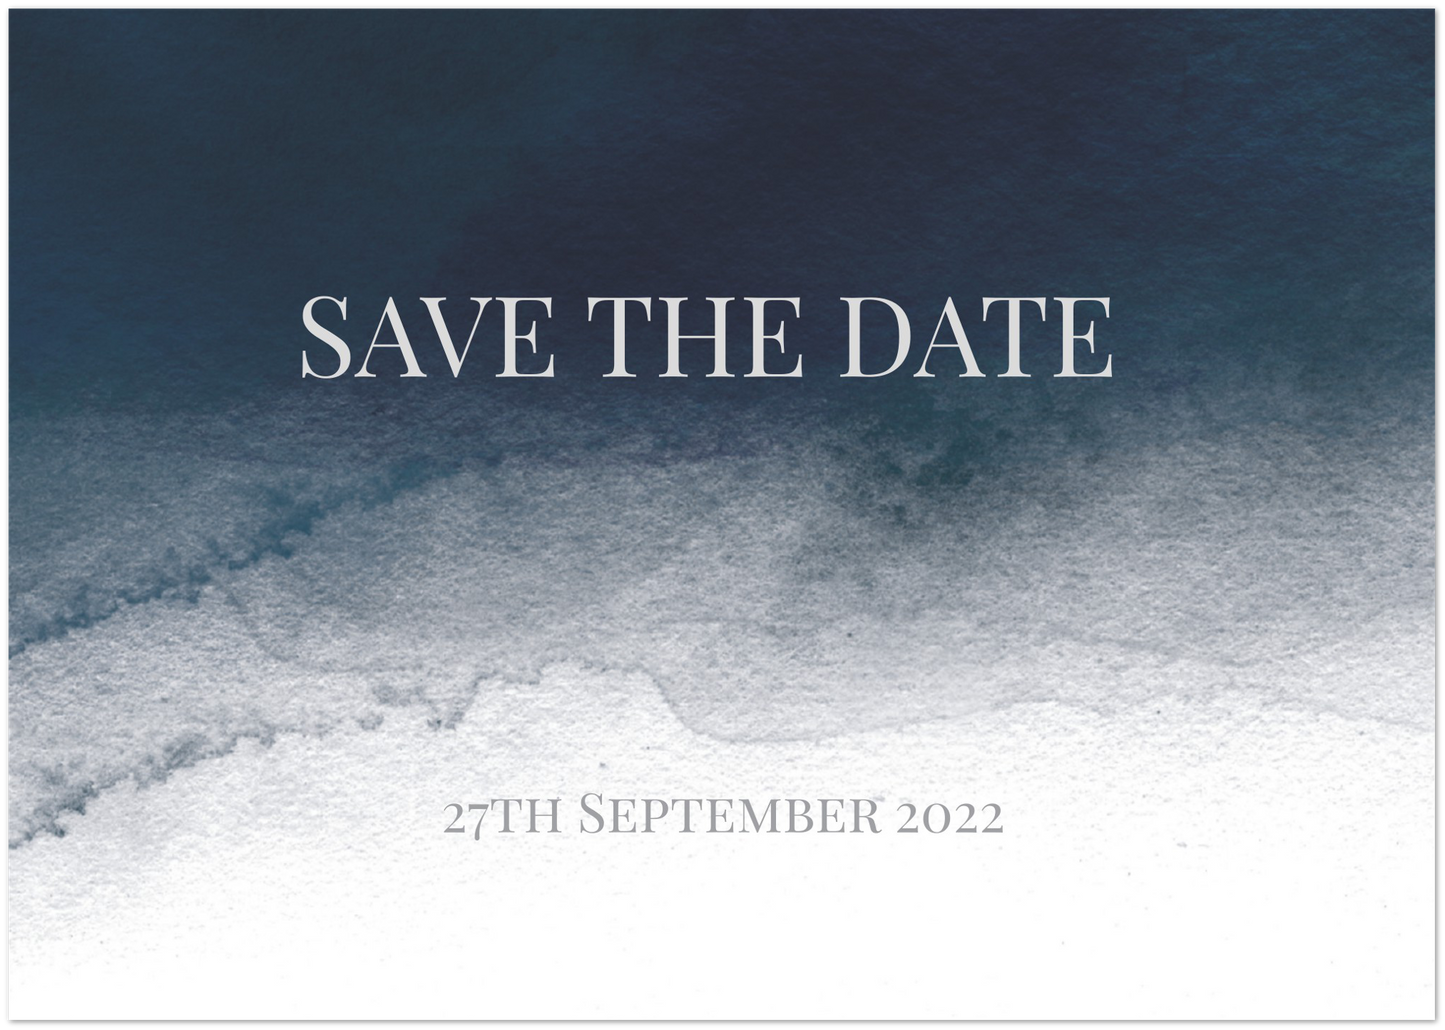 Creative Night Save the Date (sold as packs of 10 cards, flat, with white envelopes)